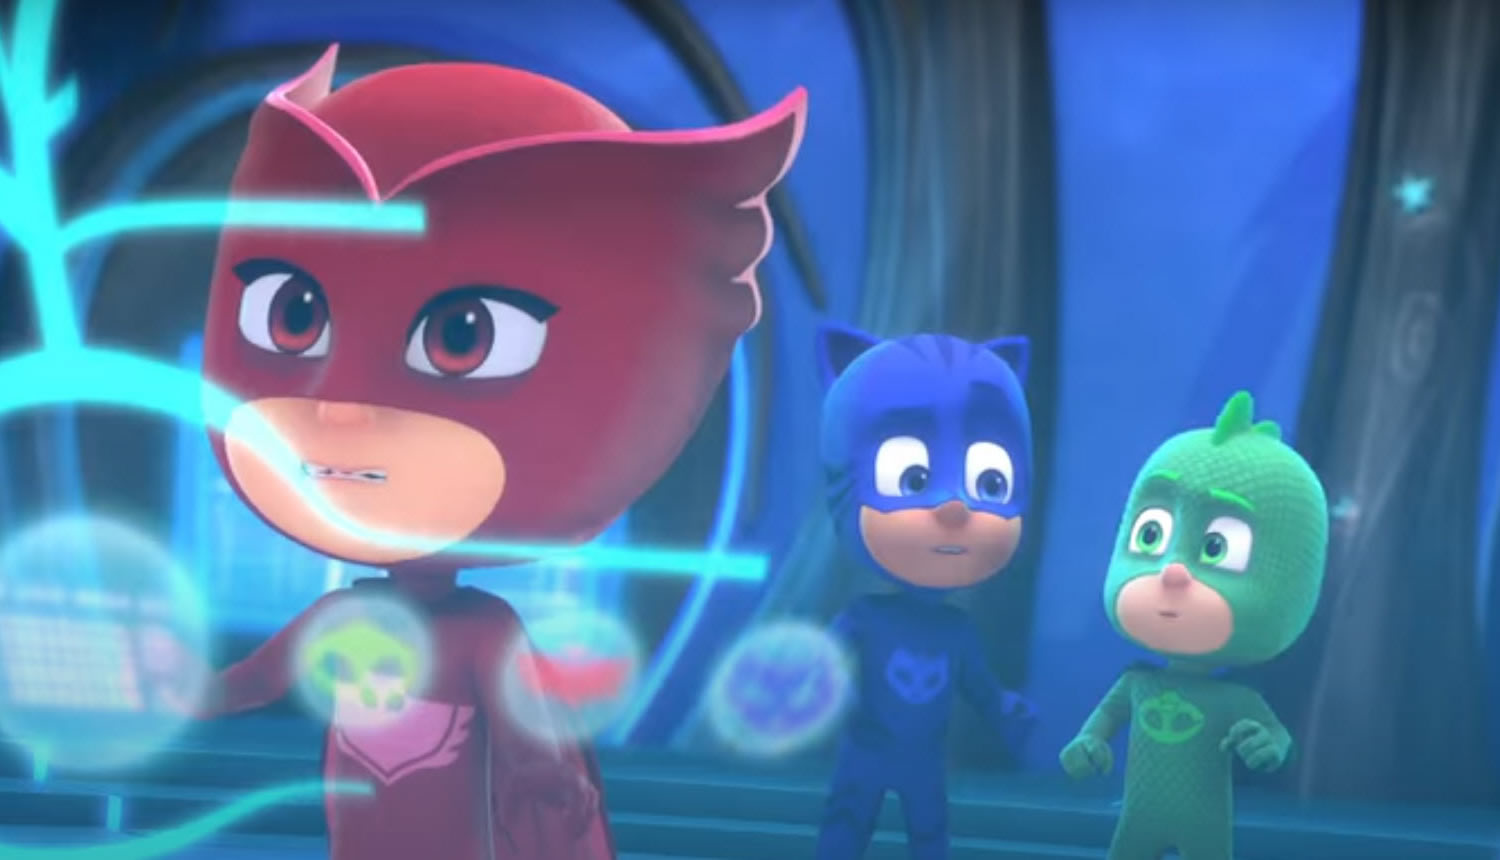 PJ Masks: Parent Viewer Thoughts and Questions